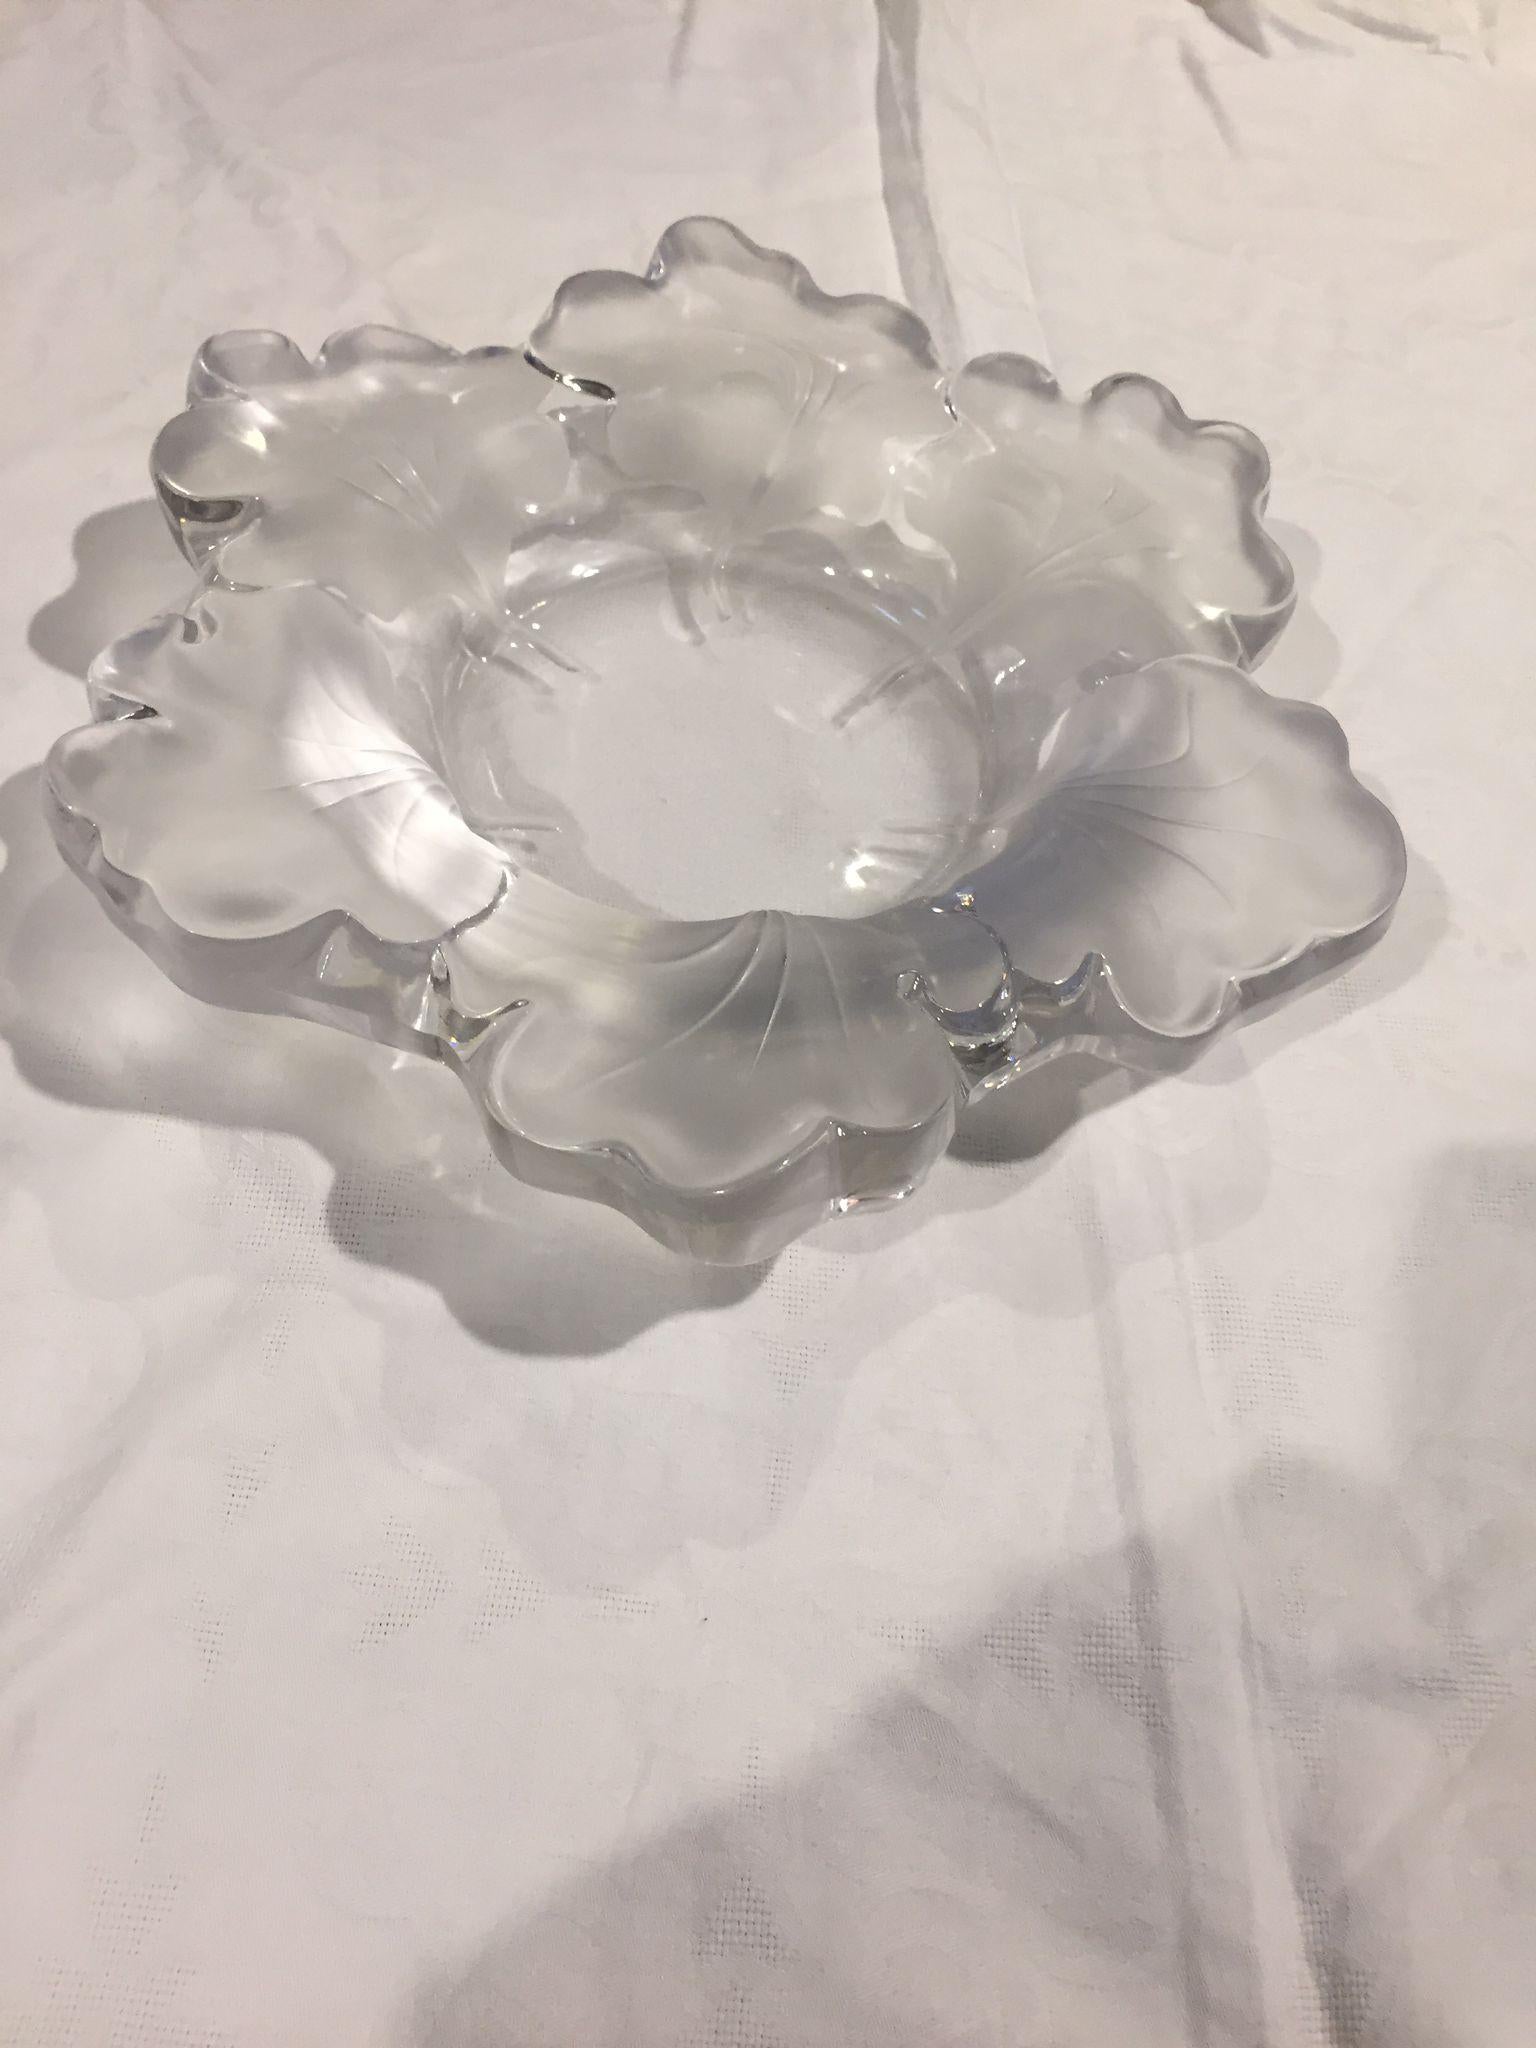 Incredible decorative Centerpiece in Lalique crystal, signed, with Floral decorations on the edges, circa 20th century, France. The Item is from the French luxury crystal manufacturer Lalique. Made in France. With manufacturer's mark: 